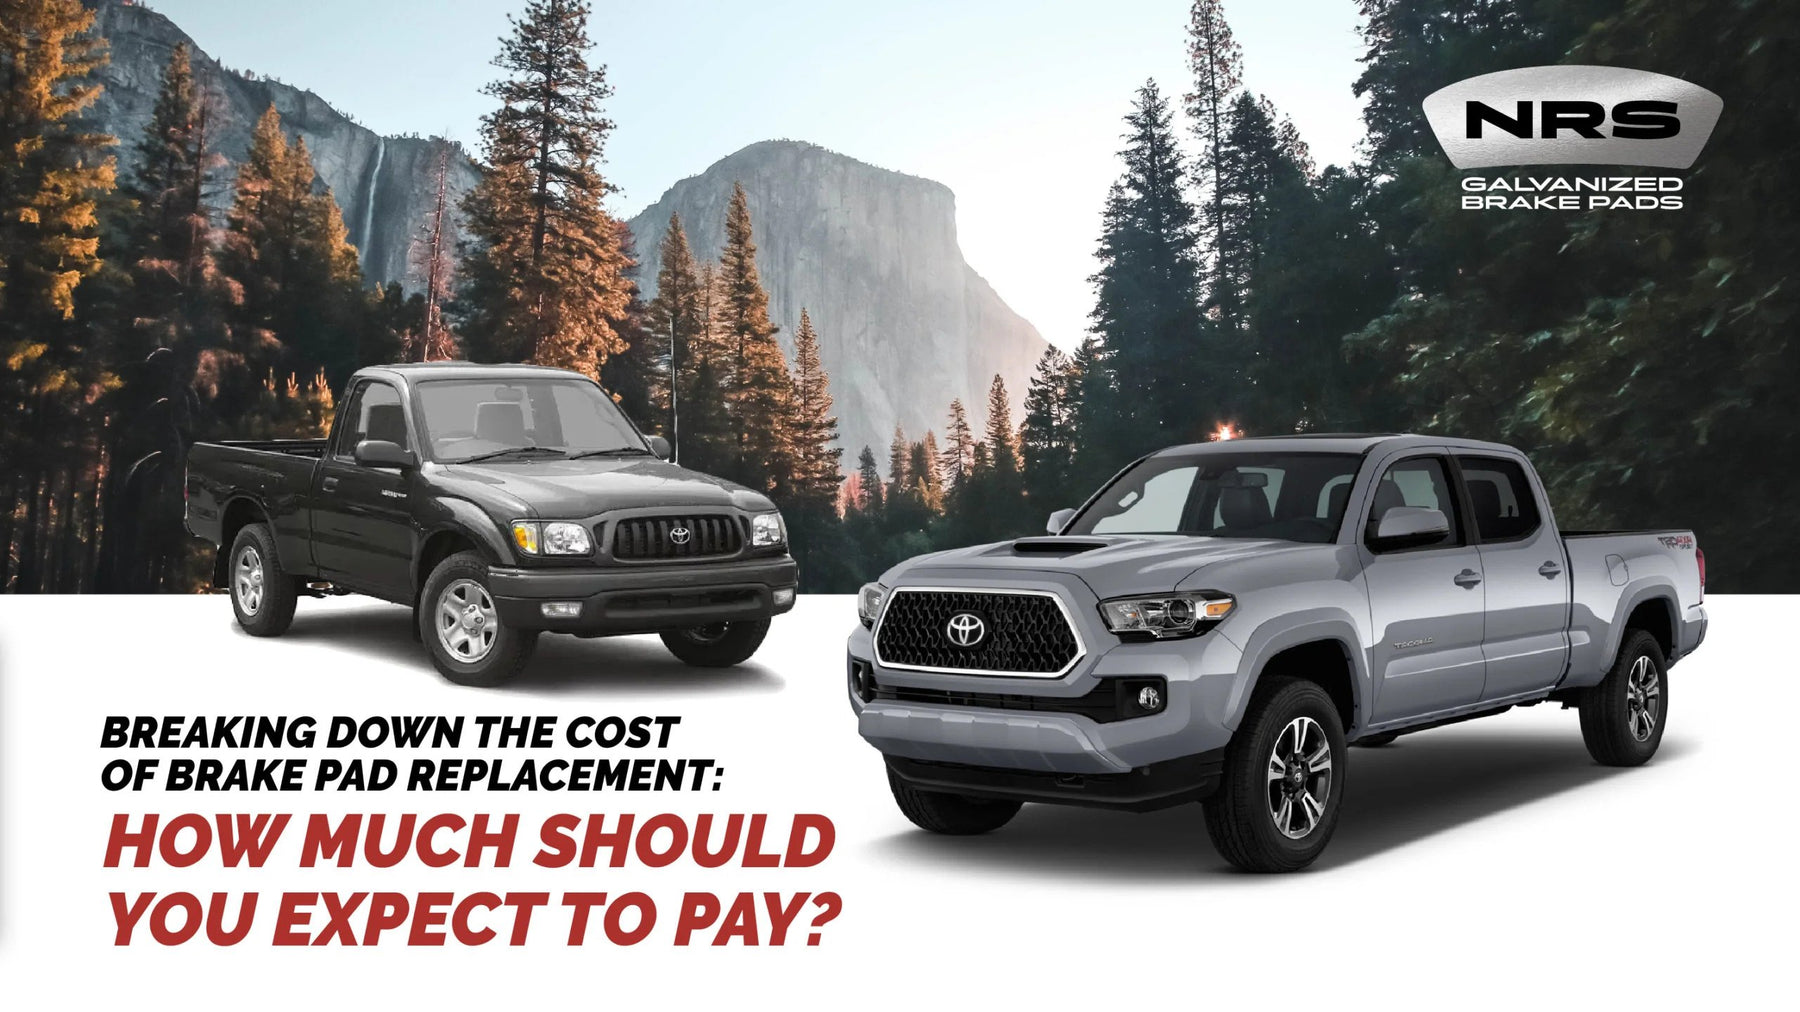 Breaking Down the Cost of Brake Pad Replacement: How Much Should You Expect to Pay?